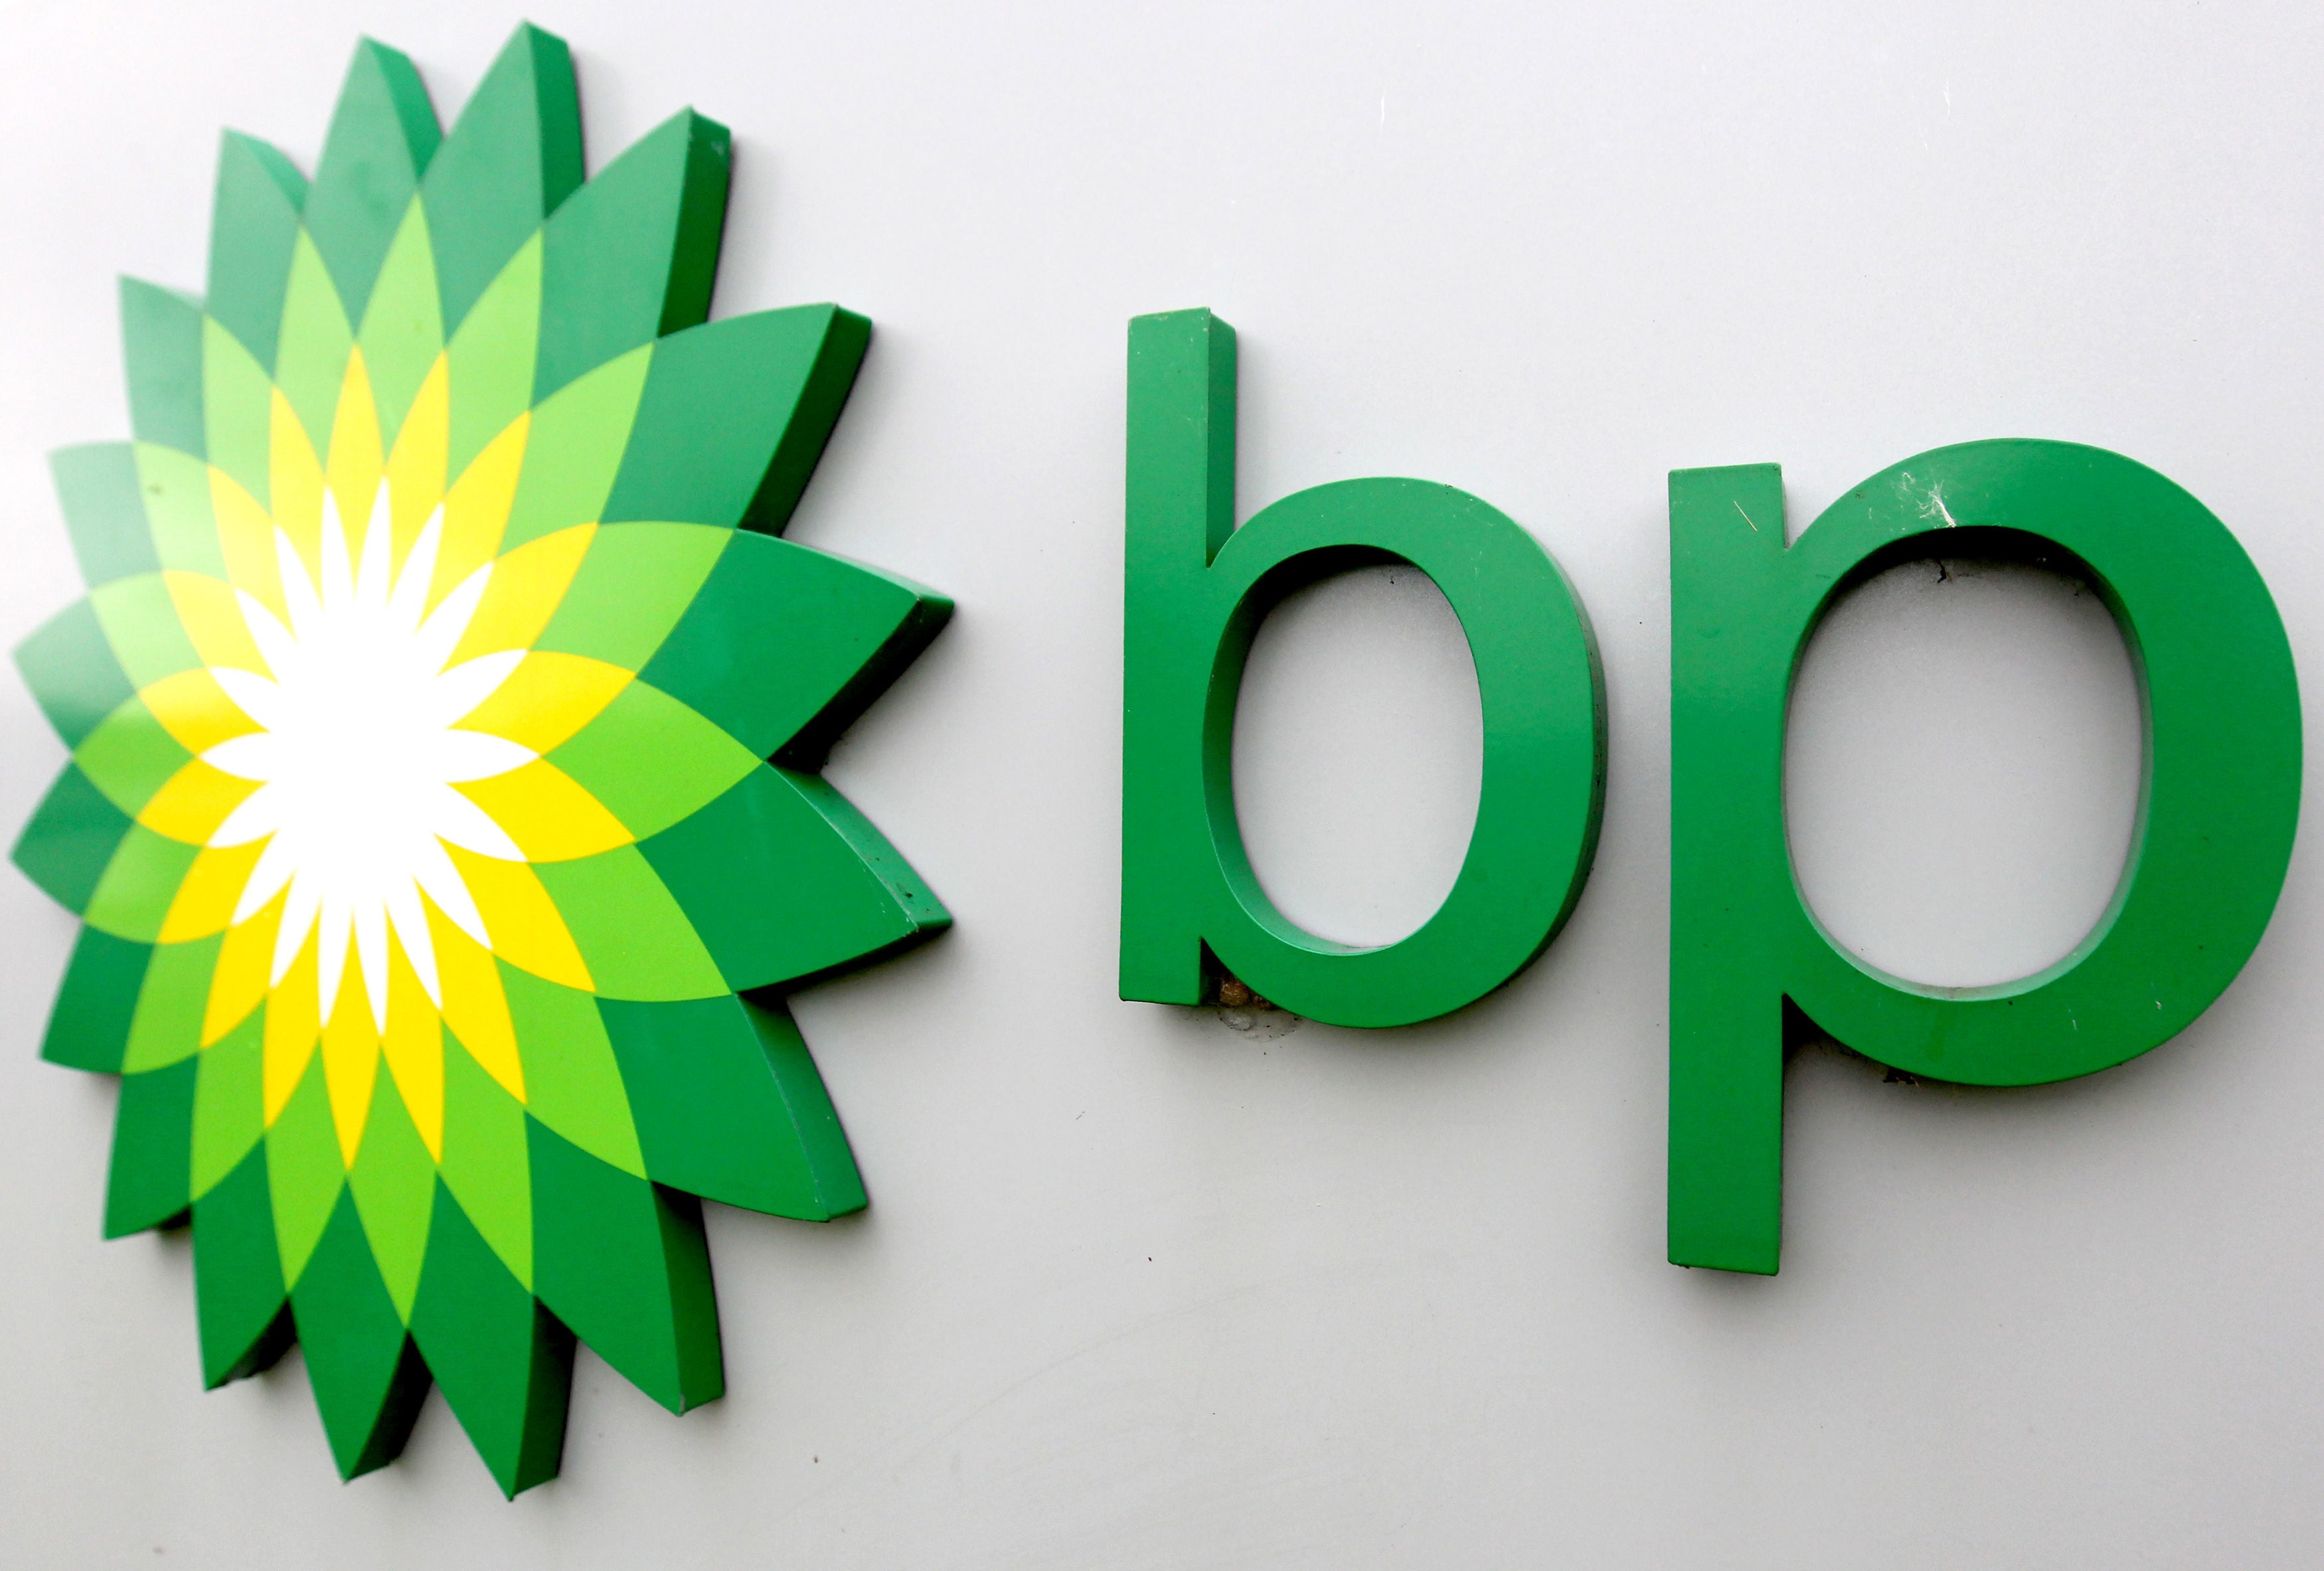 BP has told the Government it will have to reduce deliveries of petrol and diesel due to HGV shortages. (Andrew Milligan/PA)